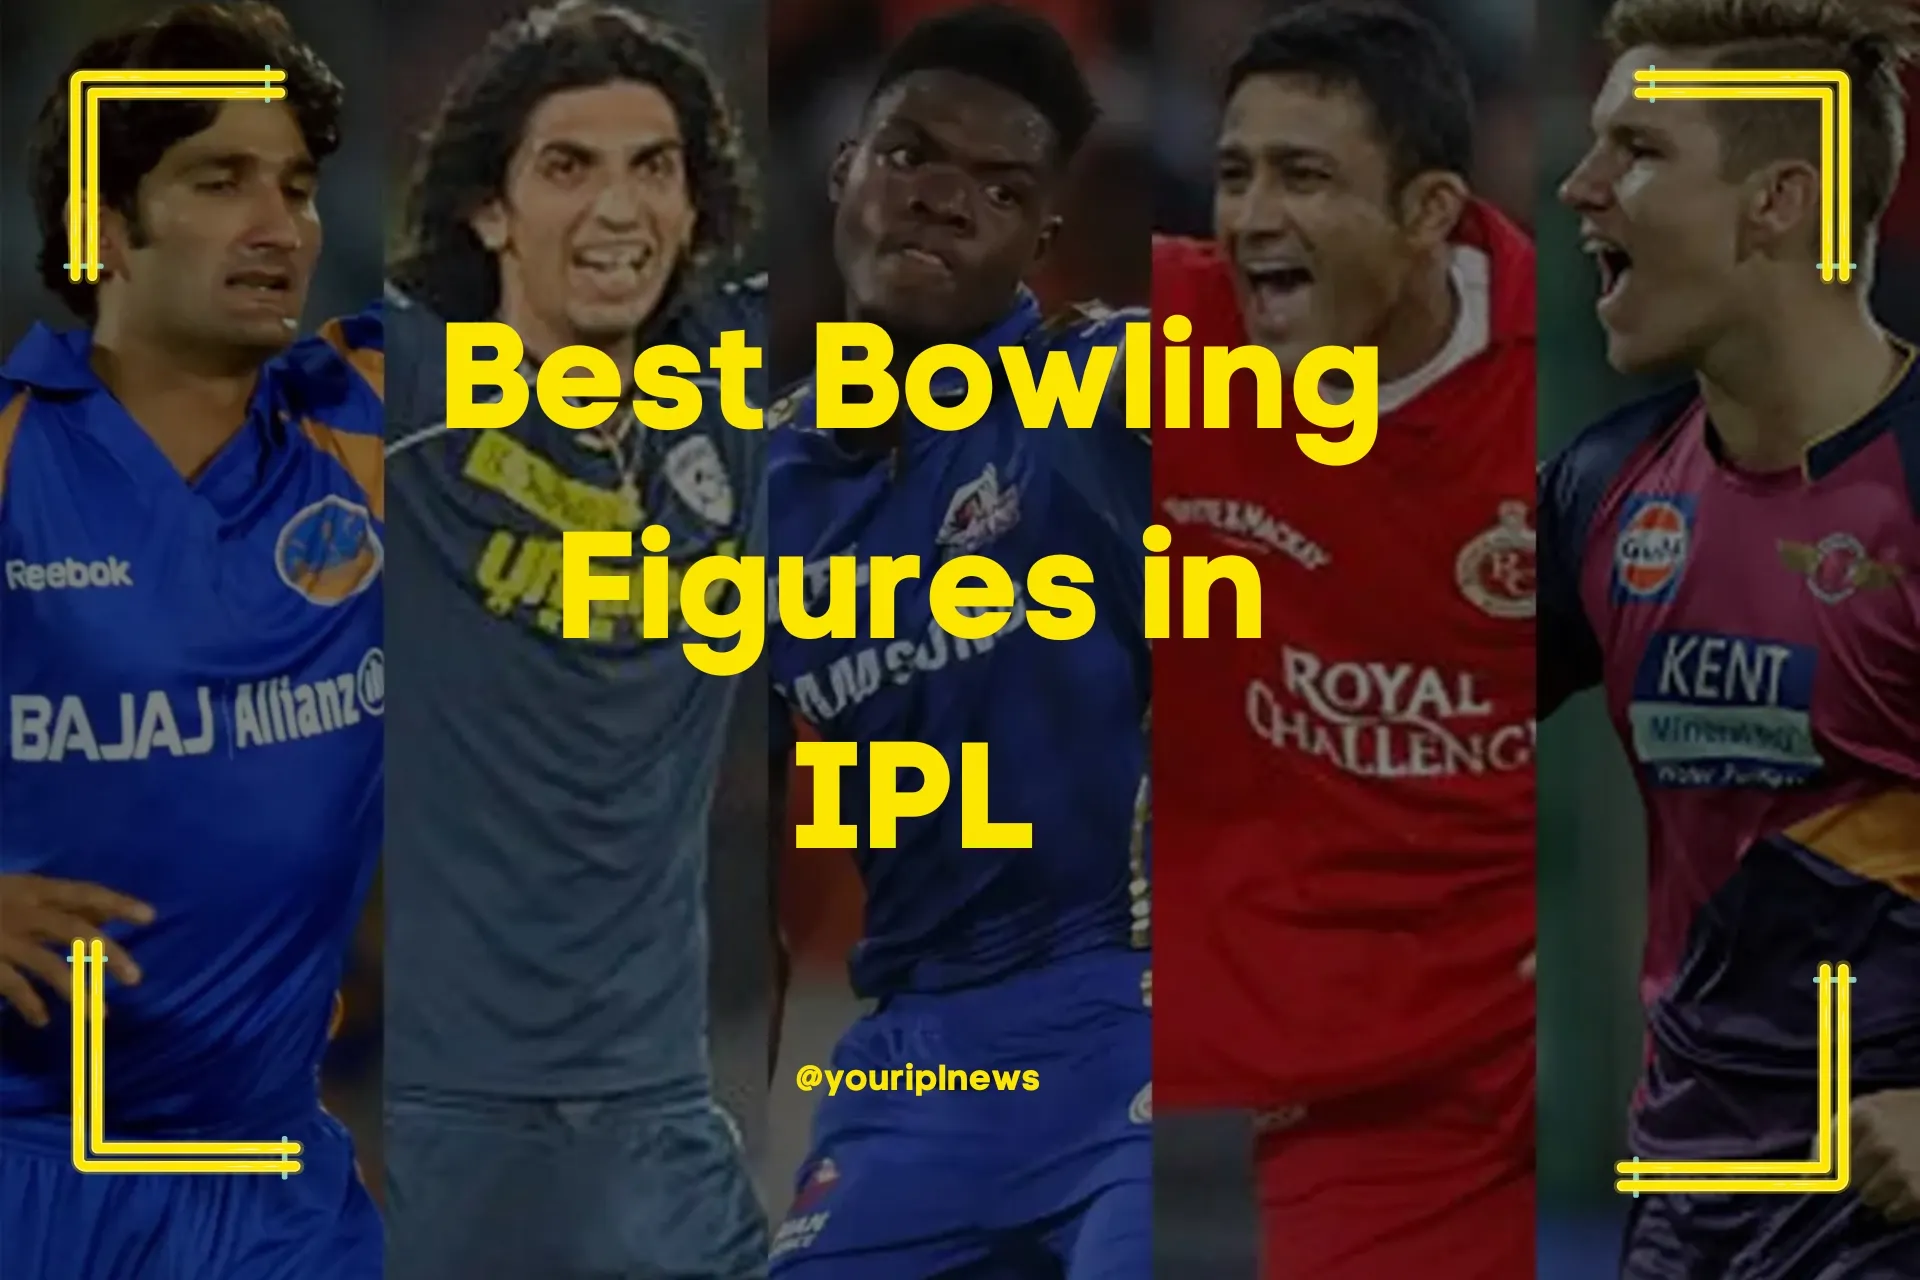 Best Bowling Figures in IPL